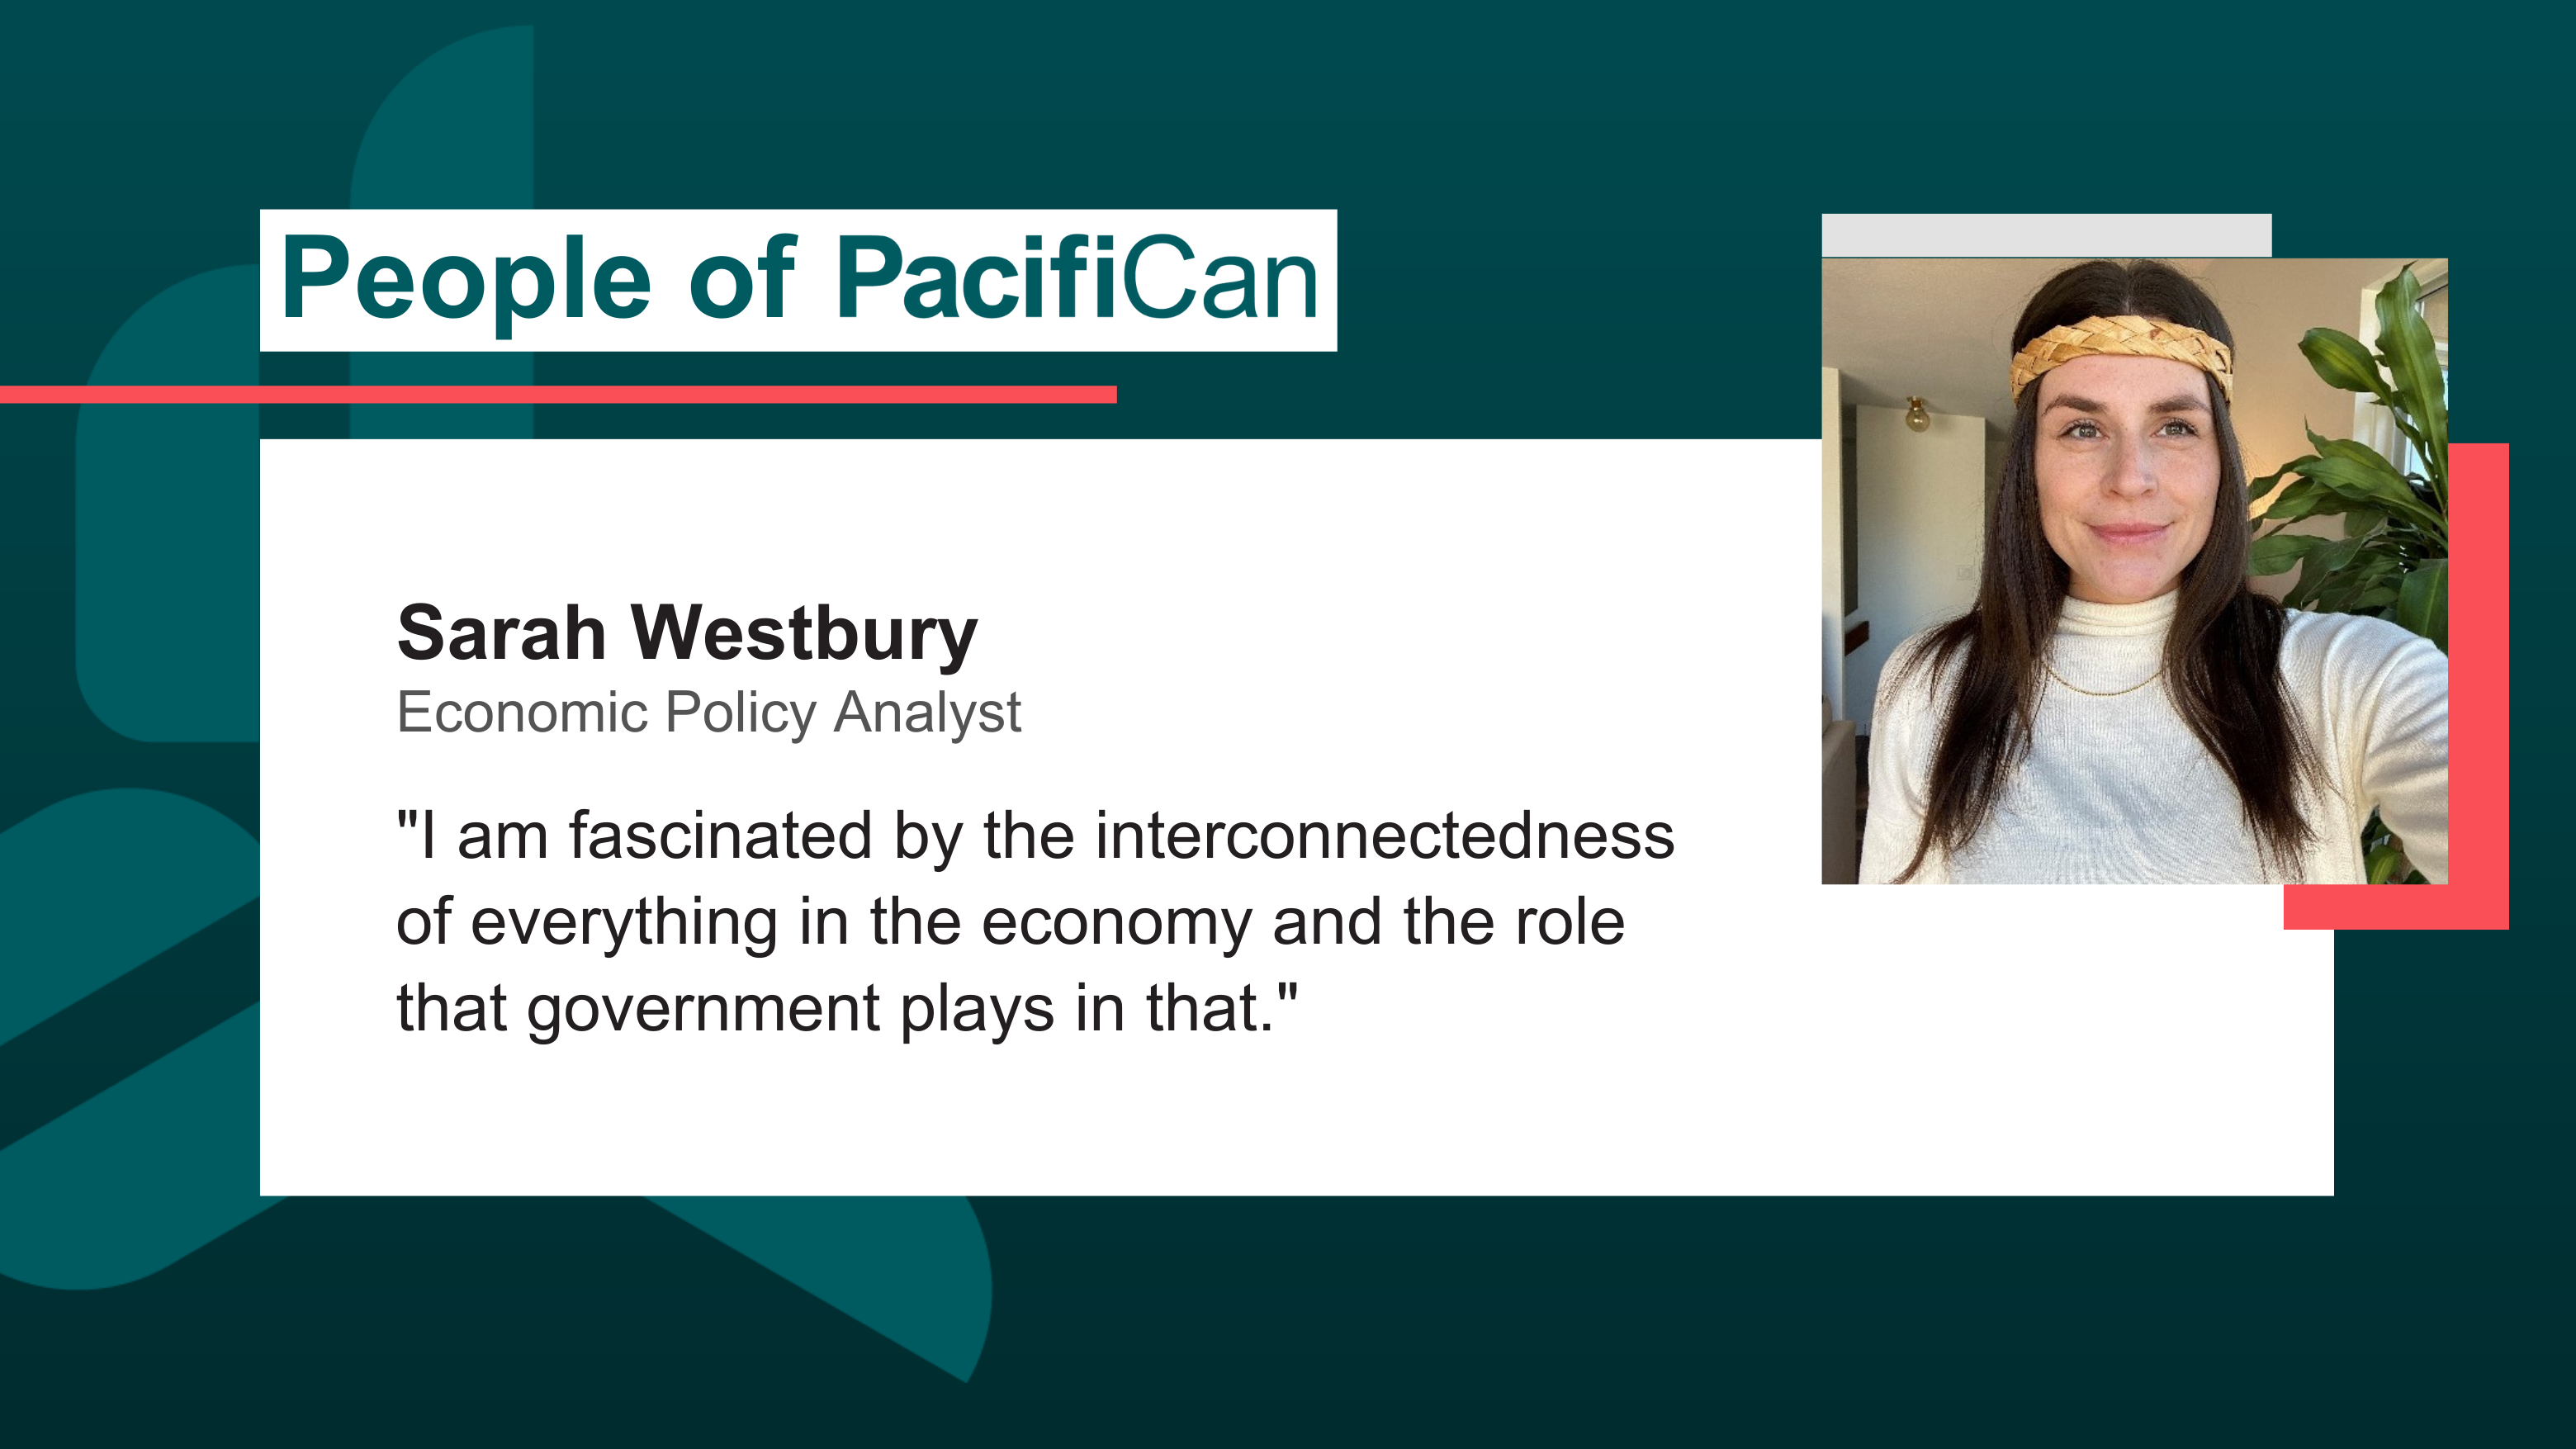 Image of Sarah Westbury, Economic Policy Analyst. Sarah's headshot is pictured wearing a cedar headband, next to the caption I am fascinated by the interconnectedness of everything in the economy and the role that government plays in that.